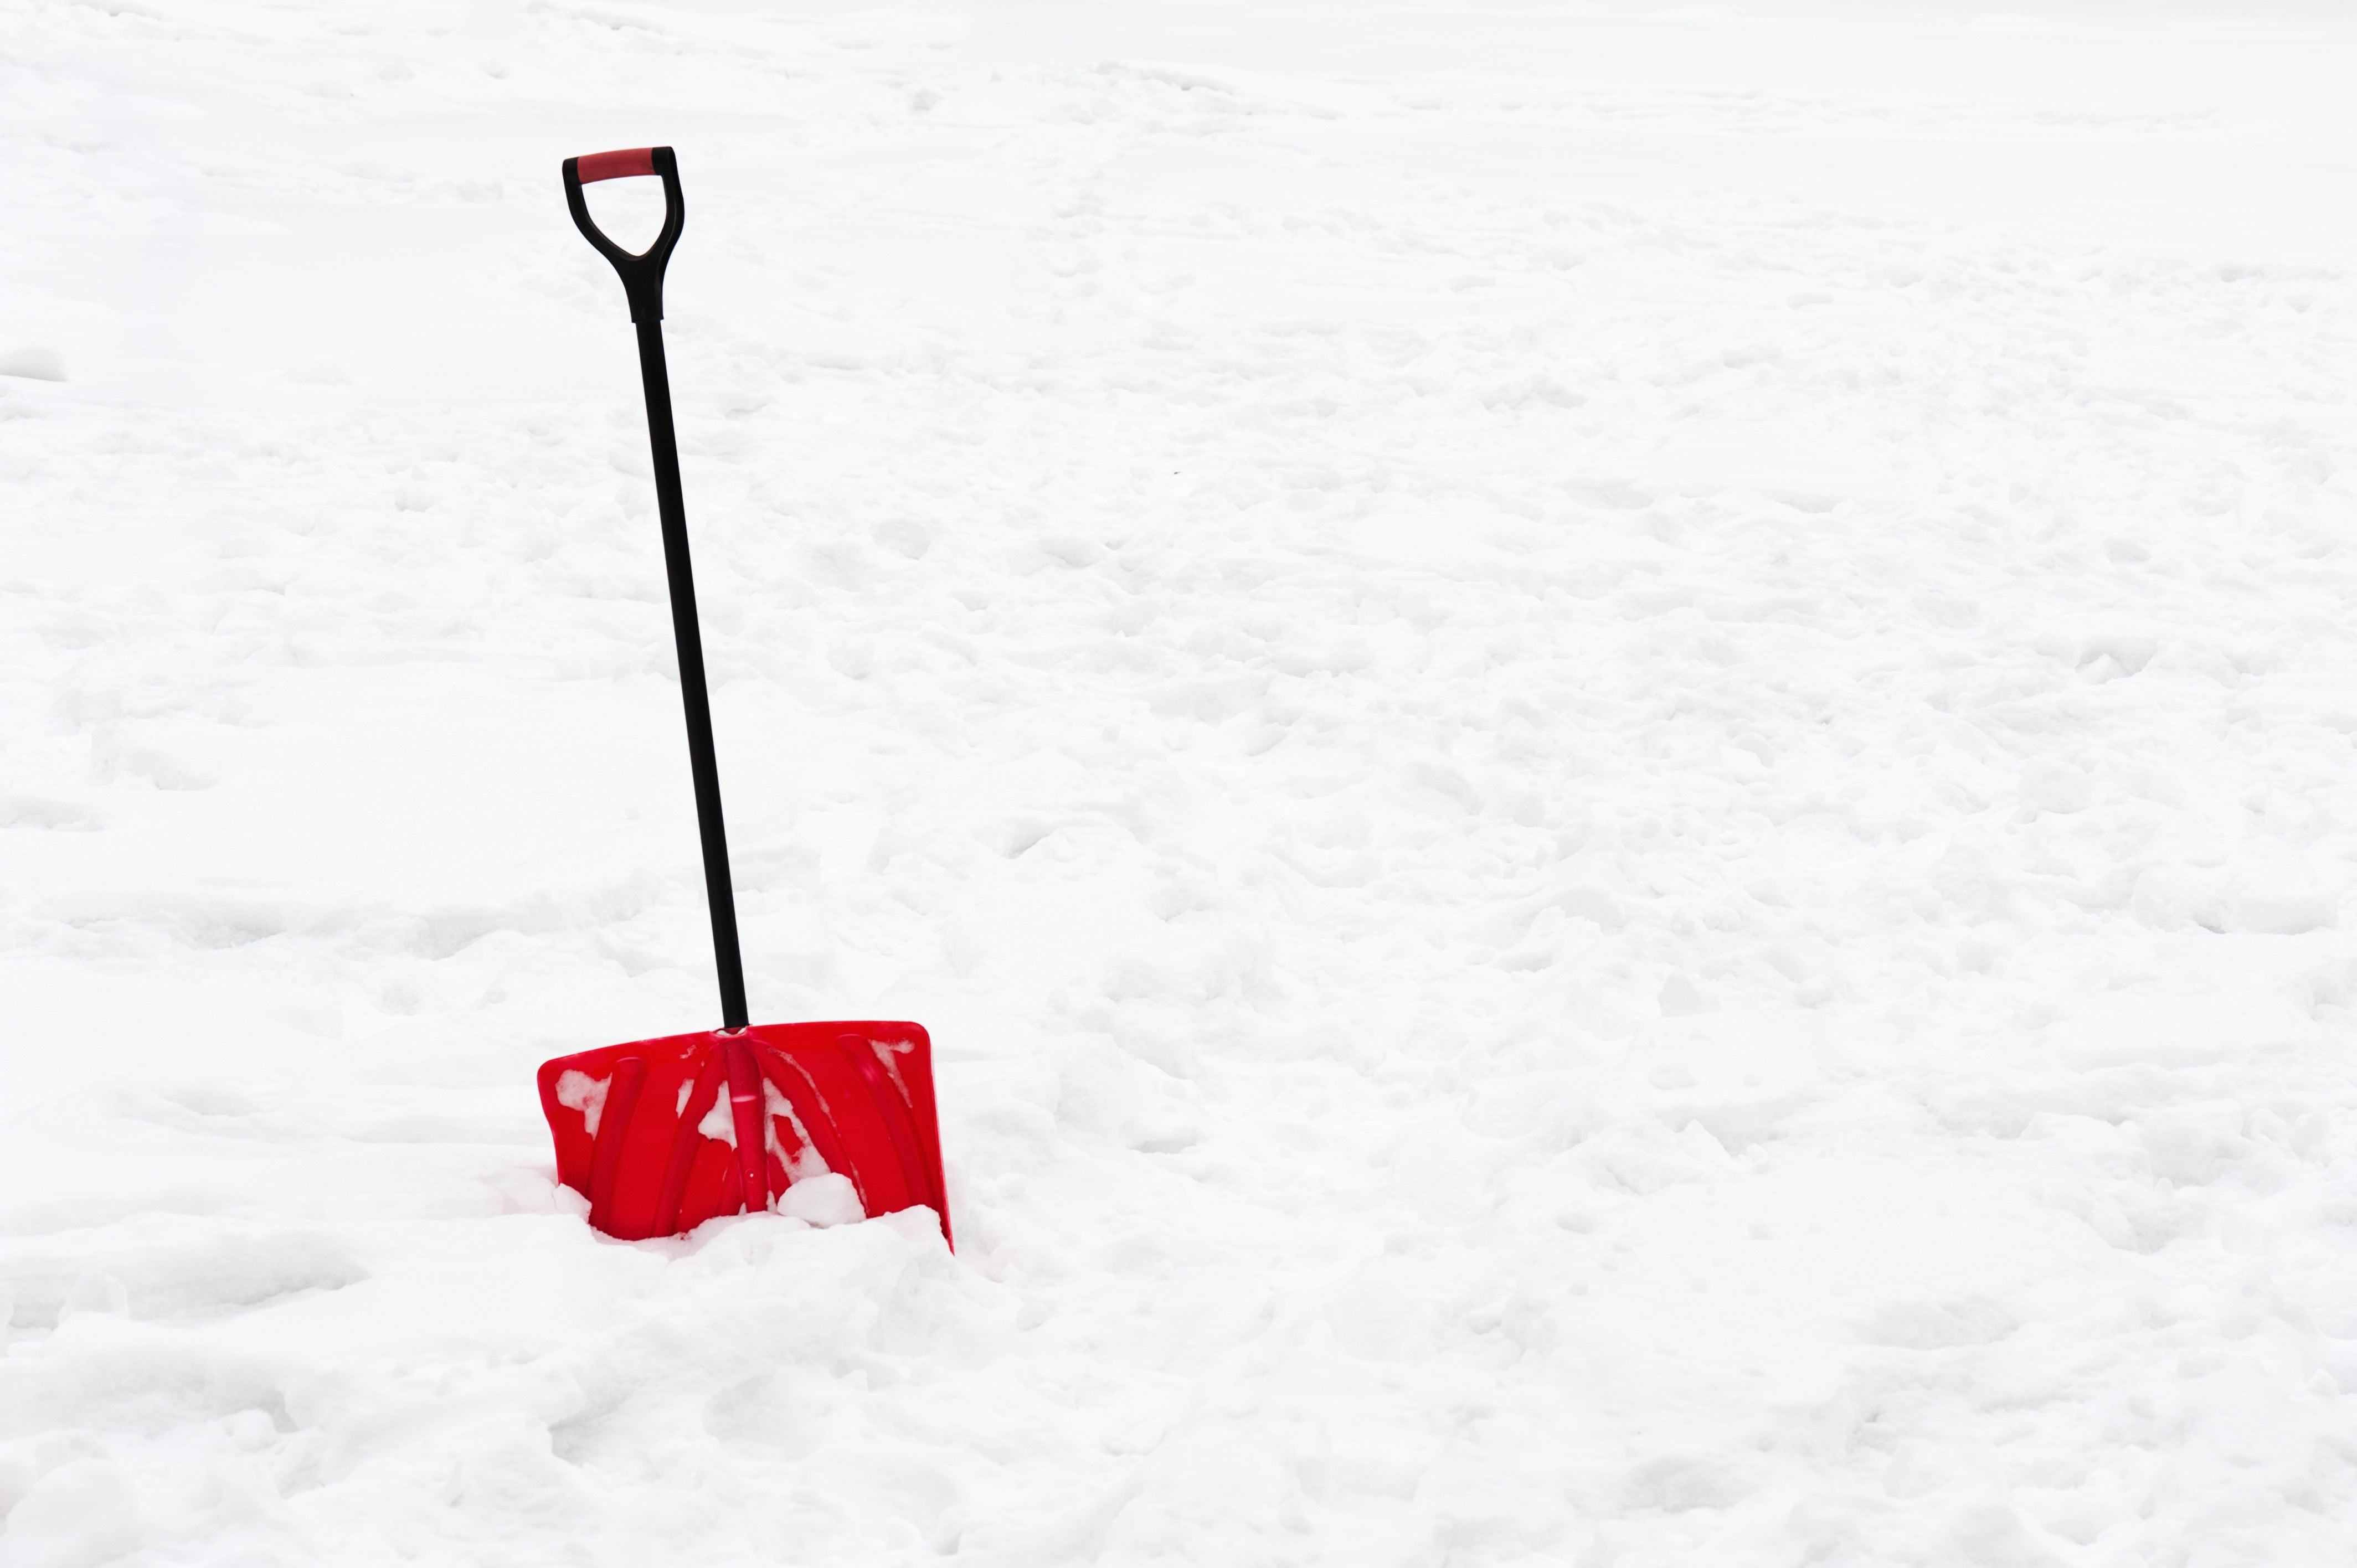 Ways to Get Help With Snow Removal for Your Elderly Parents